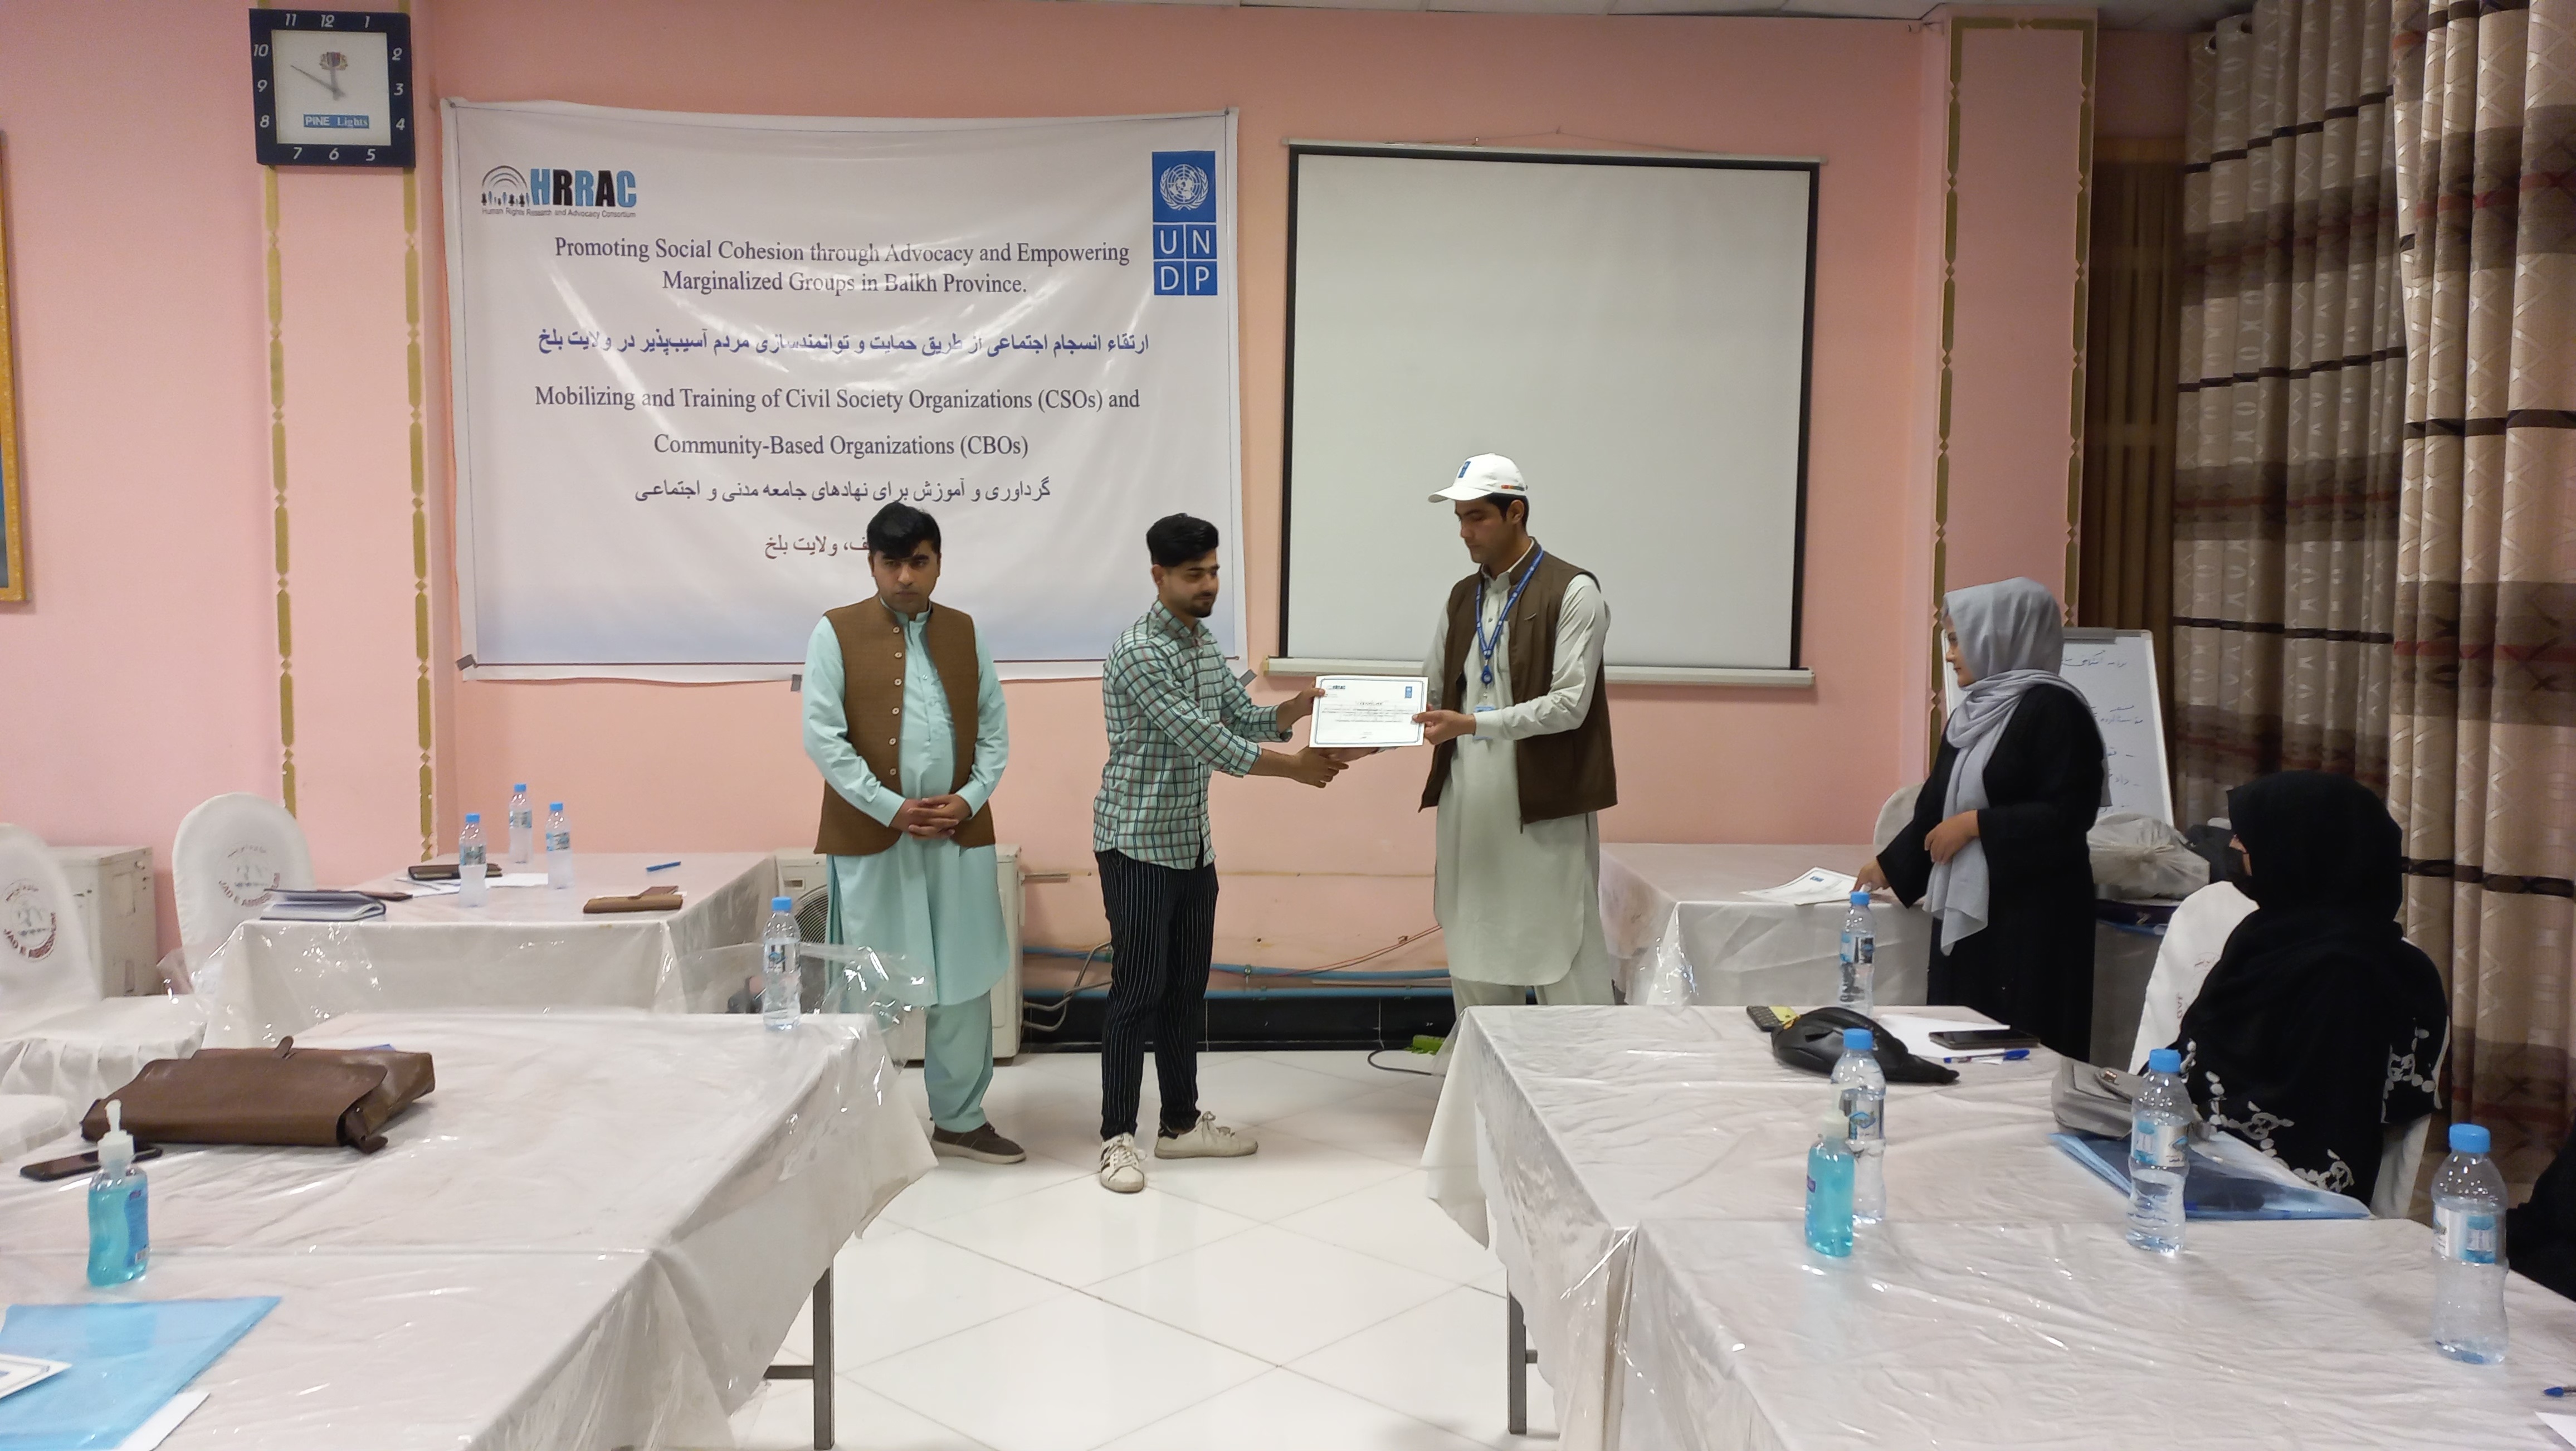 Promoting Social Cohesion Through Advocacy and Empowering Marginalized Groups in Balkh Province.